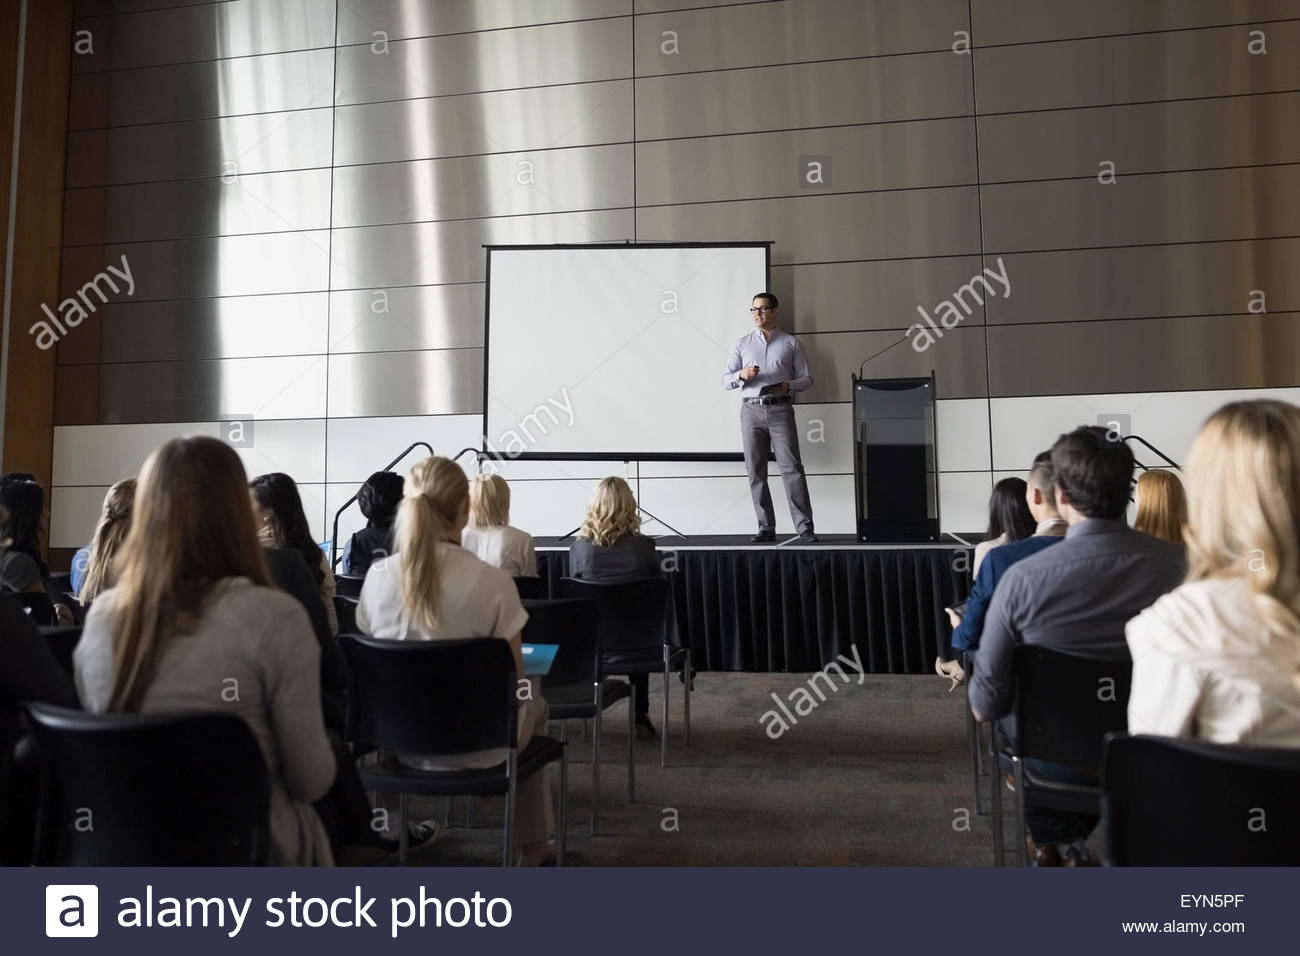 Professor on stage speaking to students in auditorium Stock Photo